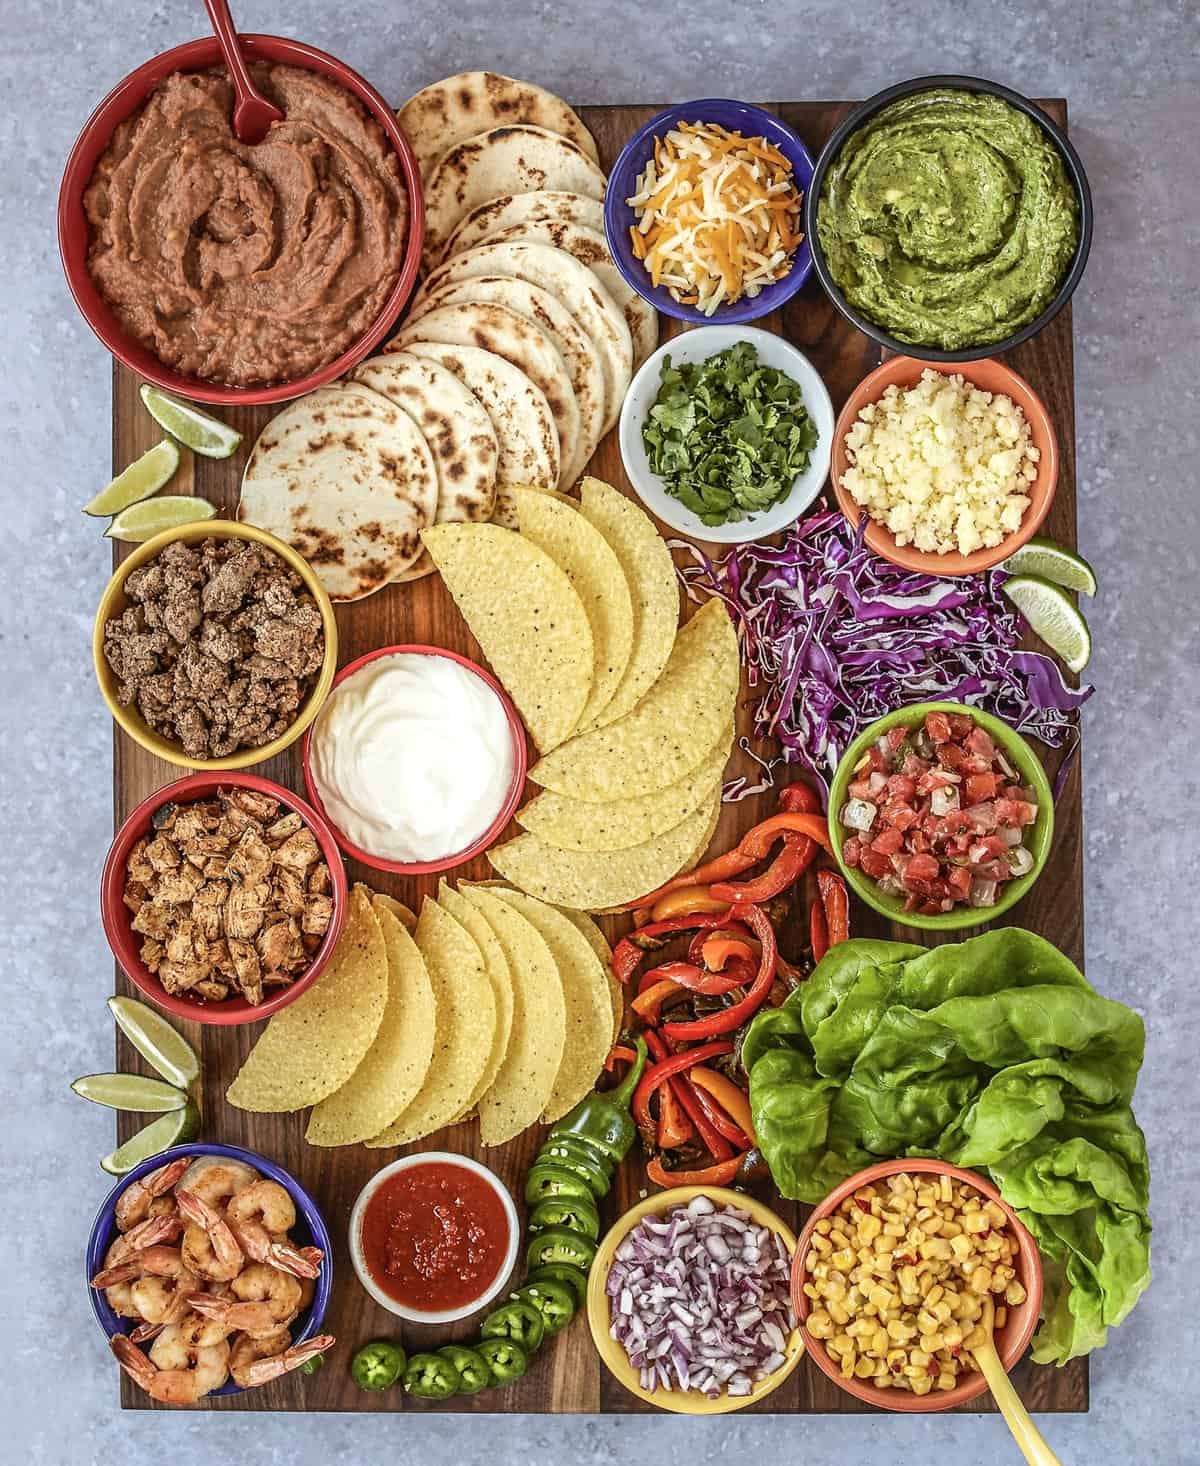 A large rectangle wood board with taco shells, flour tortillas, meats, shredded cheese, guacamole and refried beans in small containers.